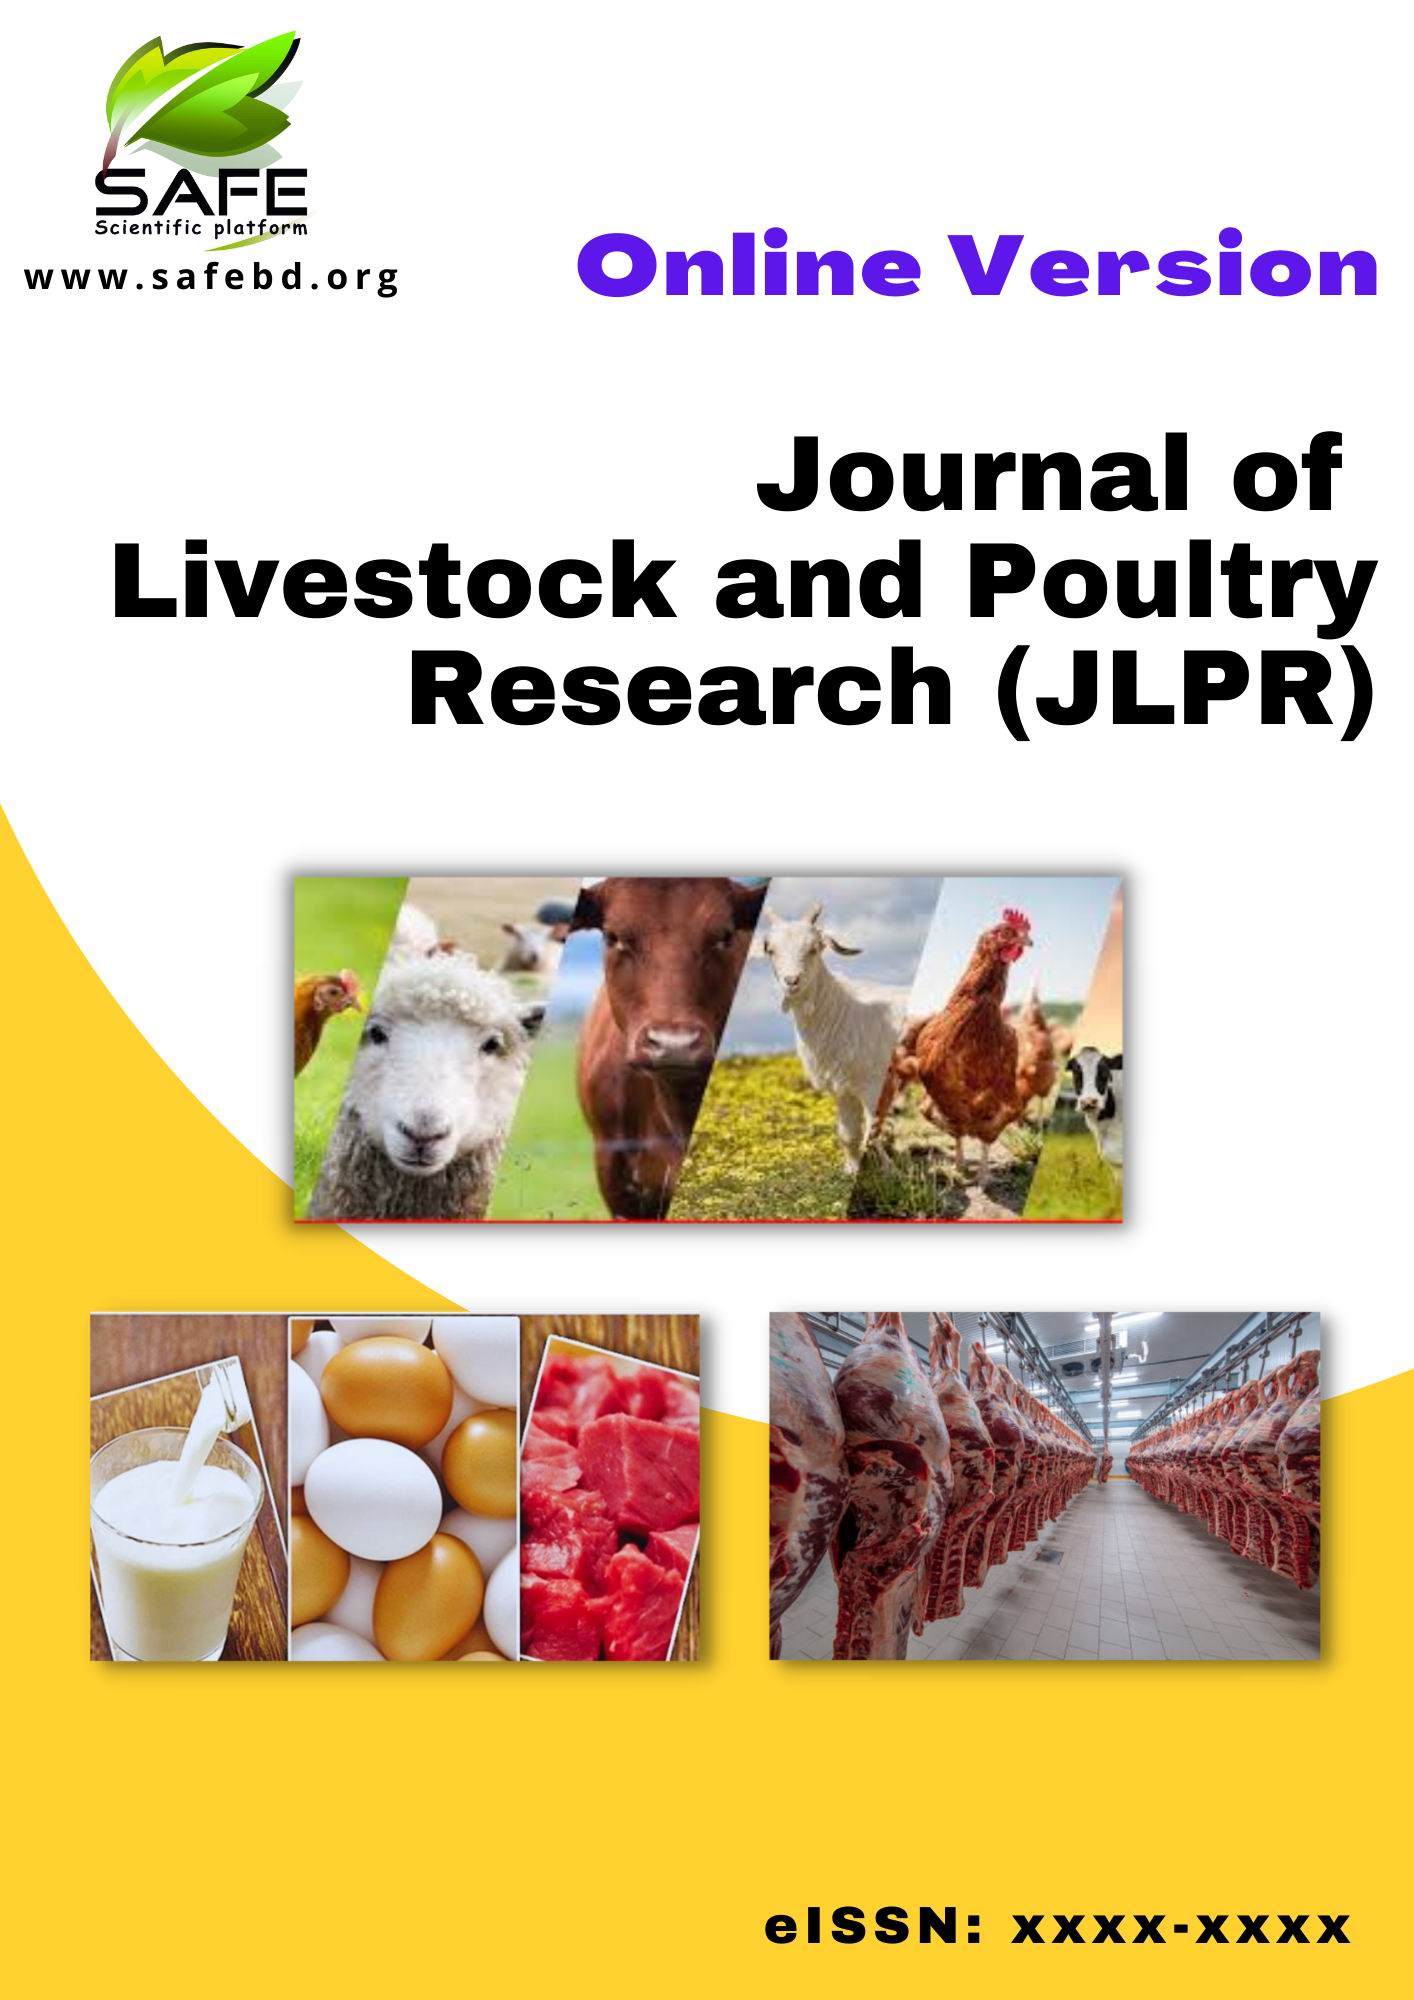 Journal of Livestock and Poultry Research (JLPR)